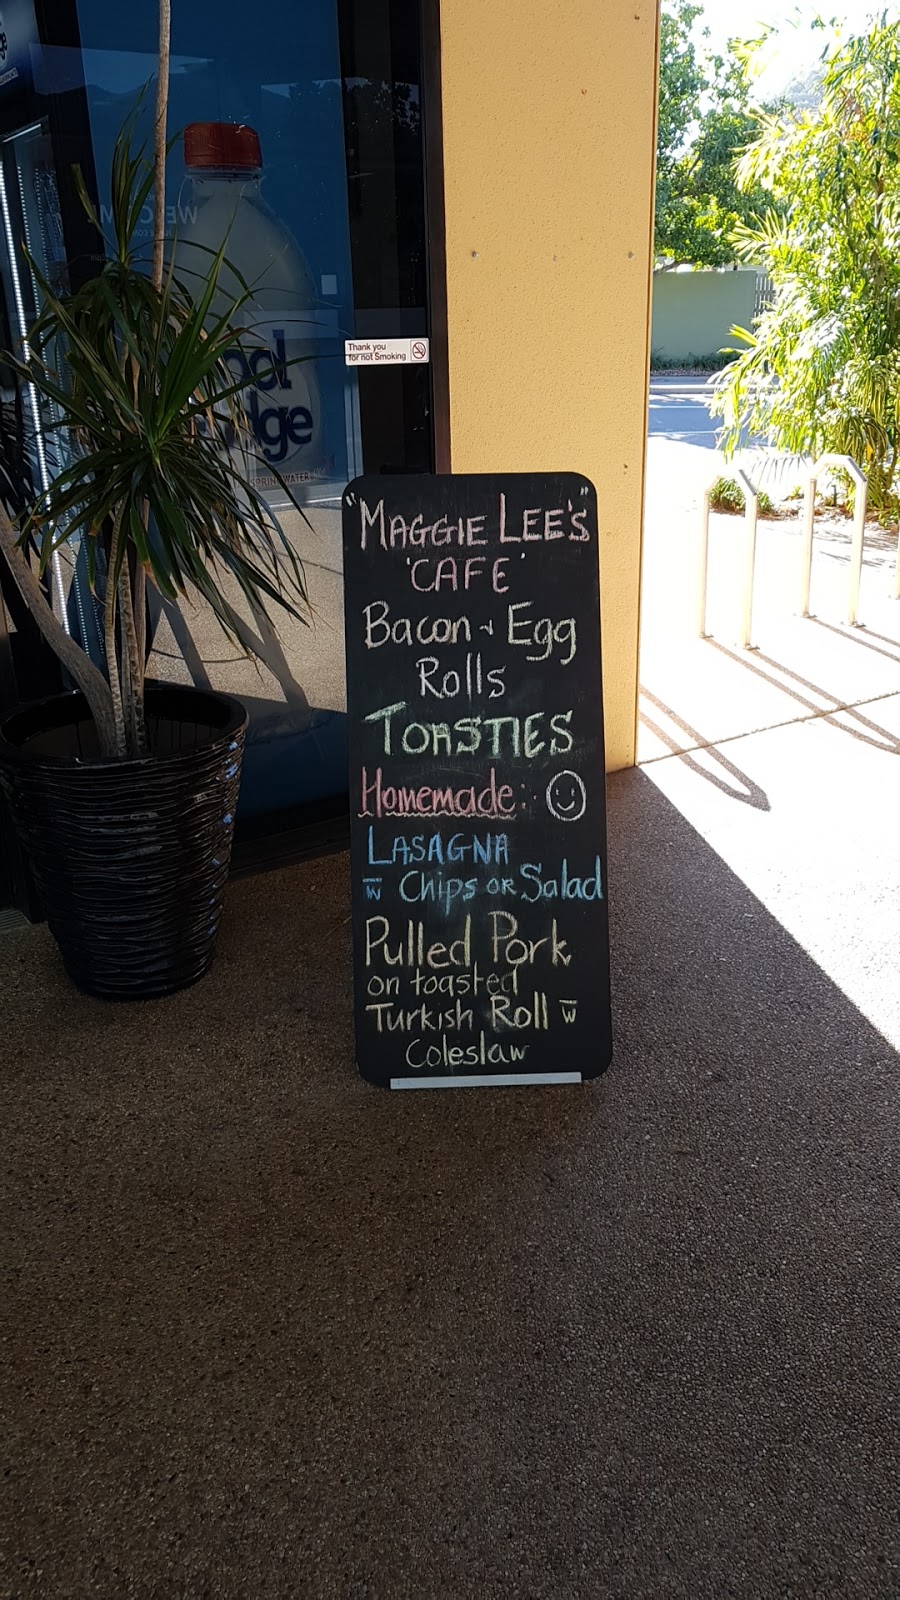 Maggie Lees Cafe | cafe | Nelly Bay QLD 4819, Australia